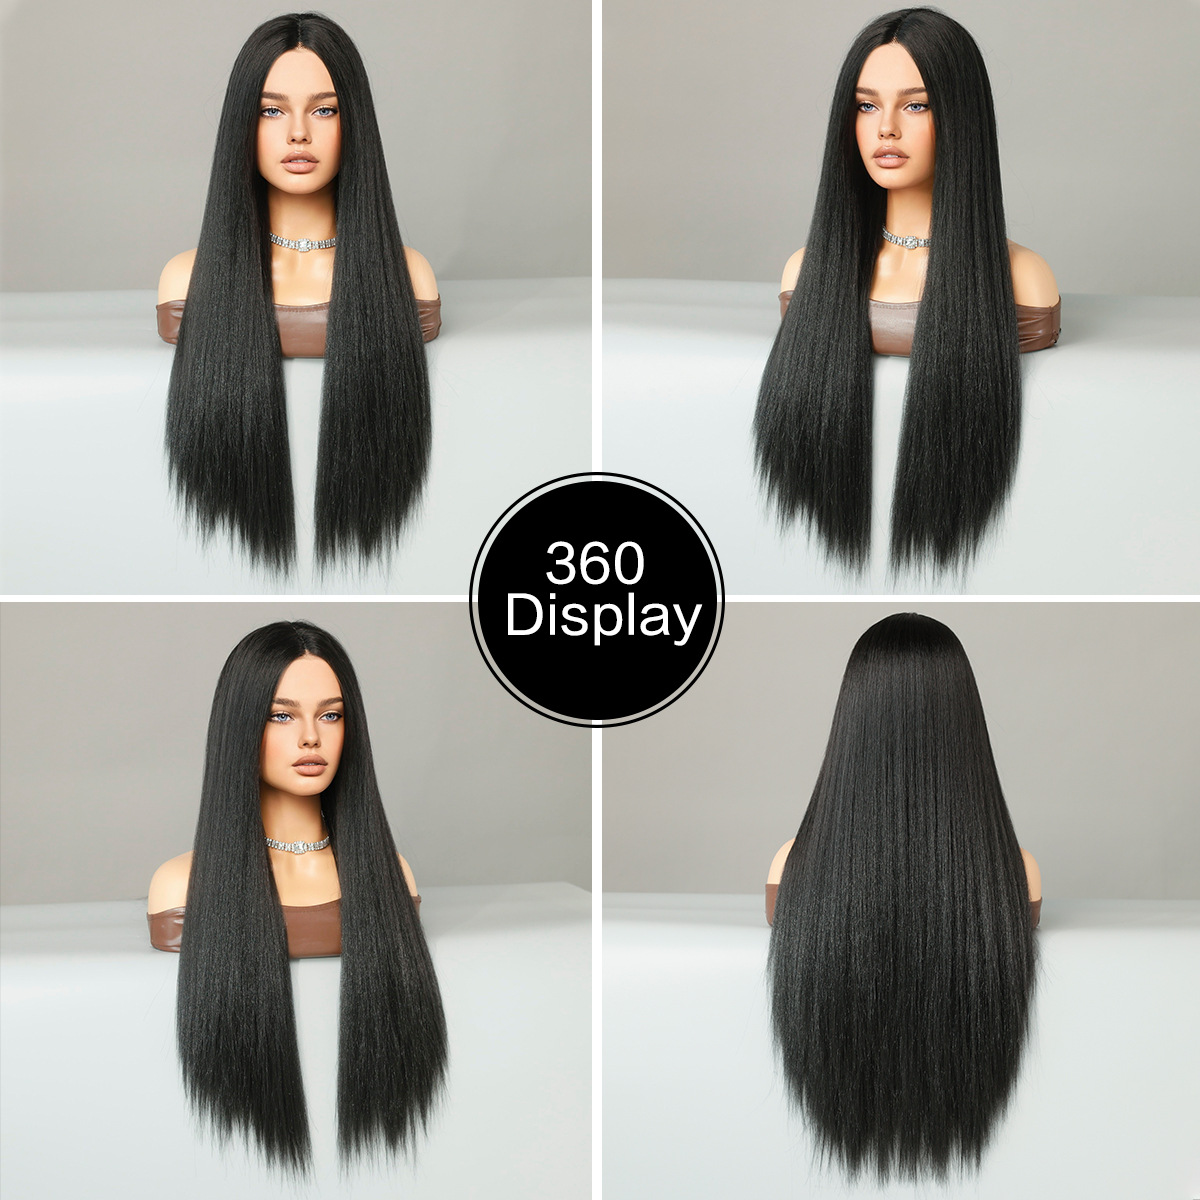 A synthetic wig featuring natural black long straight hair with a yaki texture, crafted with T-part lace and synthetic fiber for durability